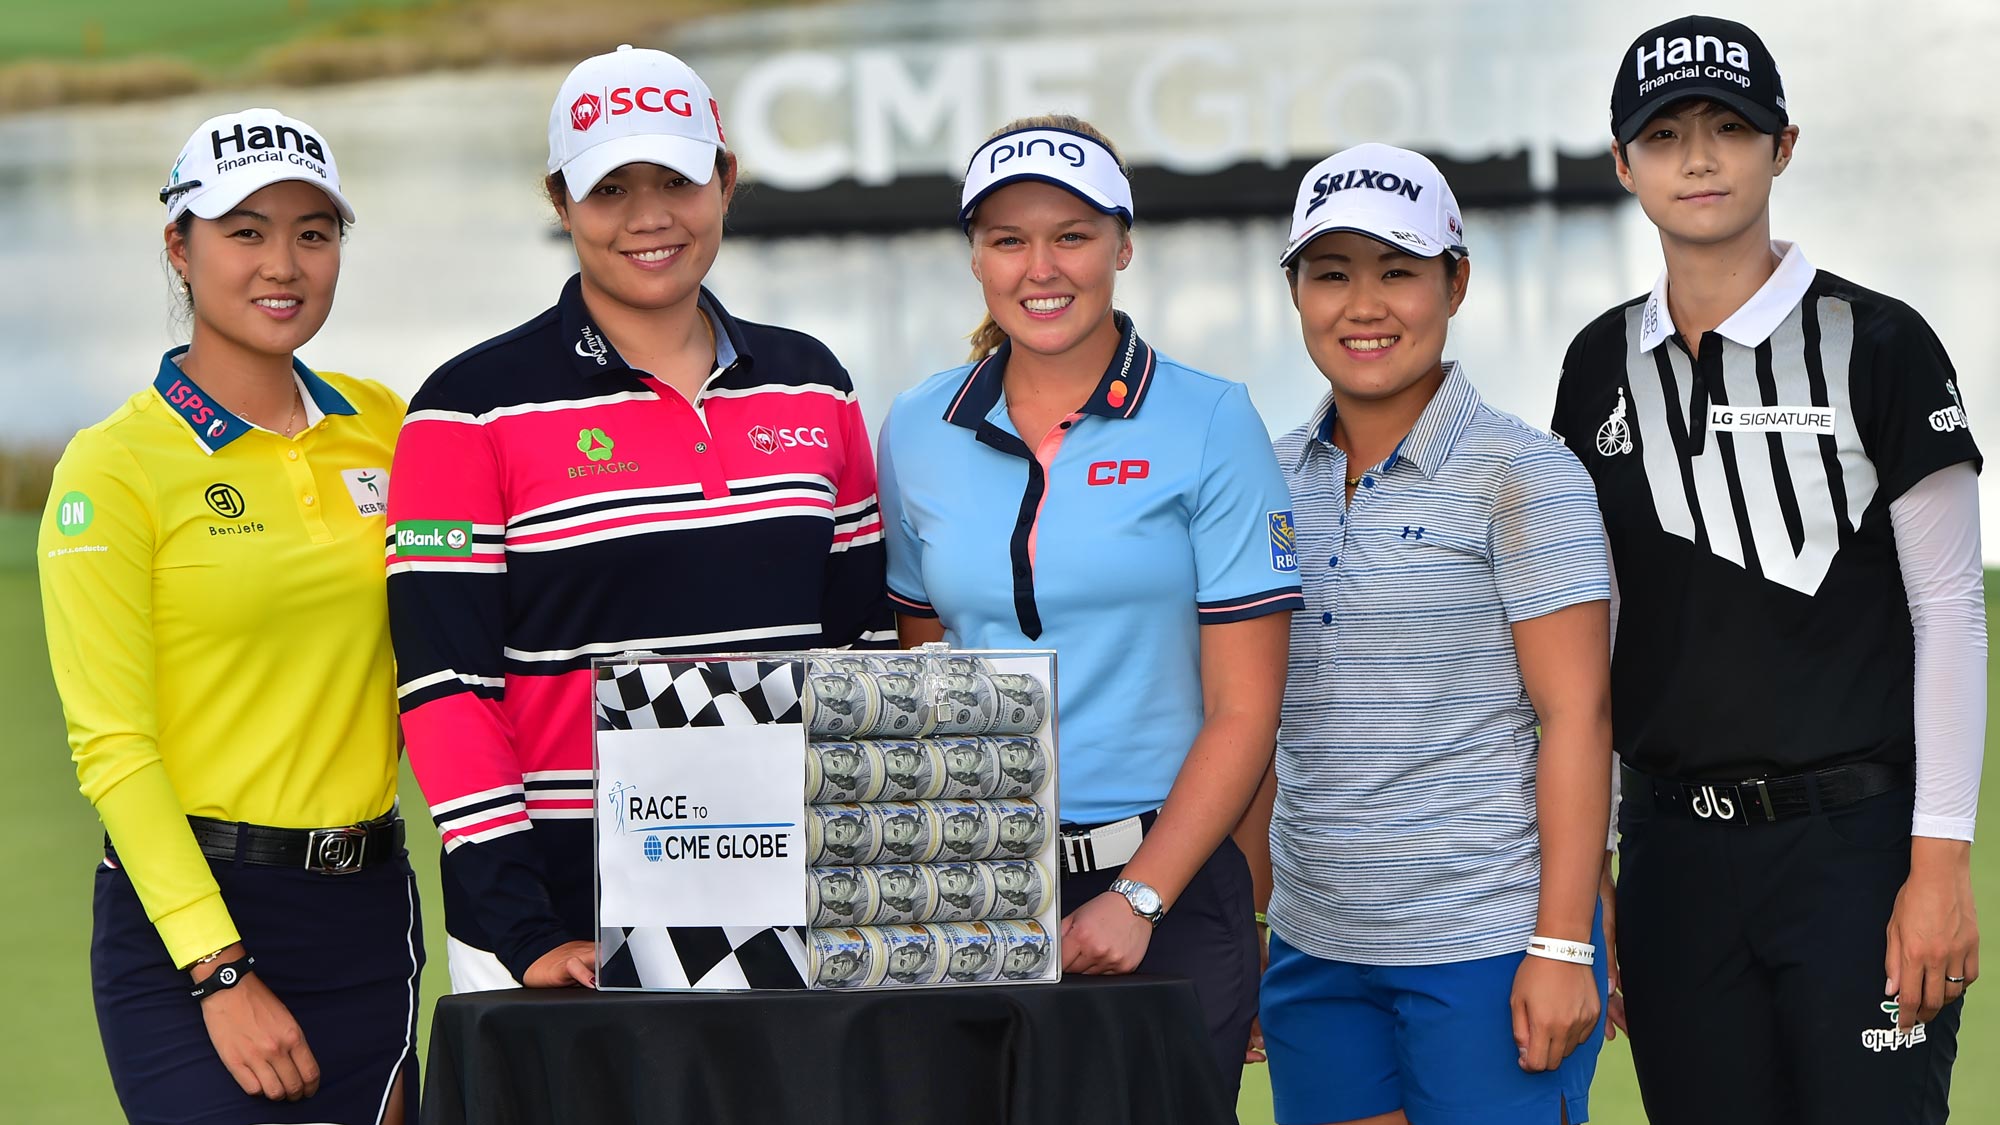 (left to right) Minjee Lee of Australia, Ariya Jutanugarn of Thailand, Brooke Henderson of Canada, Nasa Hataoka of Japan and Sung Hyun Park of South Korea pose for a photo with the Race for the CME Globe Money Box on the 18th green prior to the LPGA CME Group Tour Championship